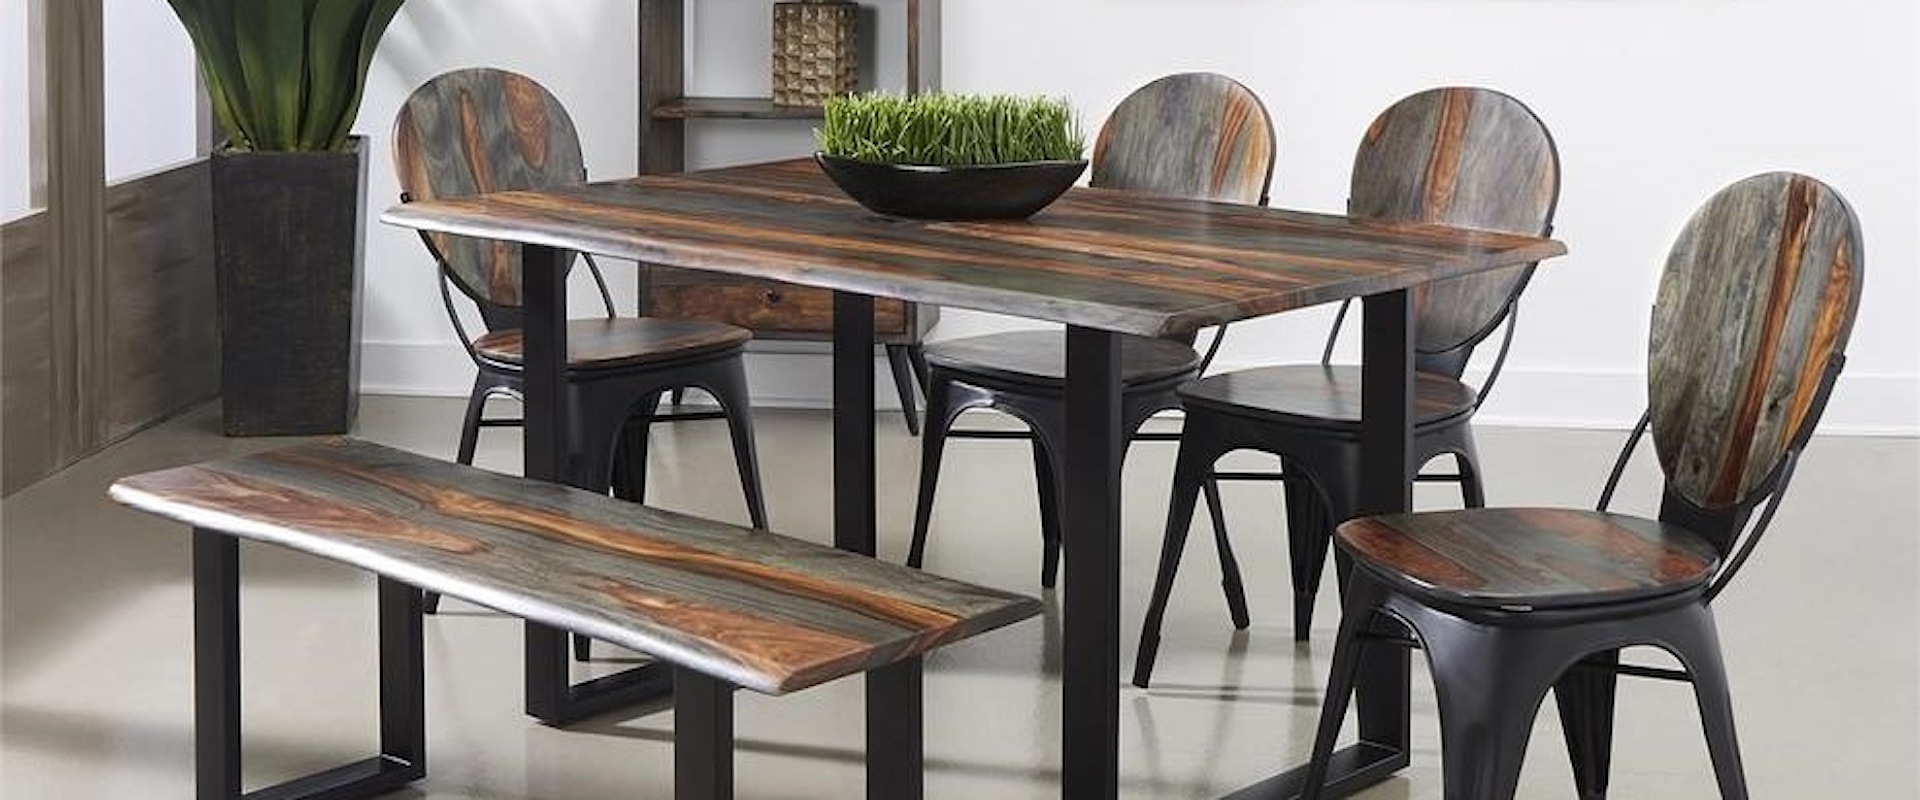 Industrial 6-Piece Dining Set with Bench